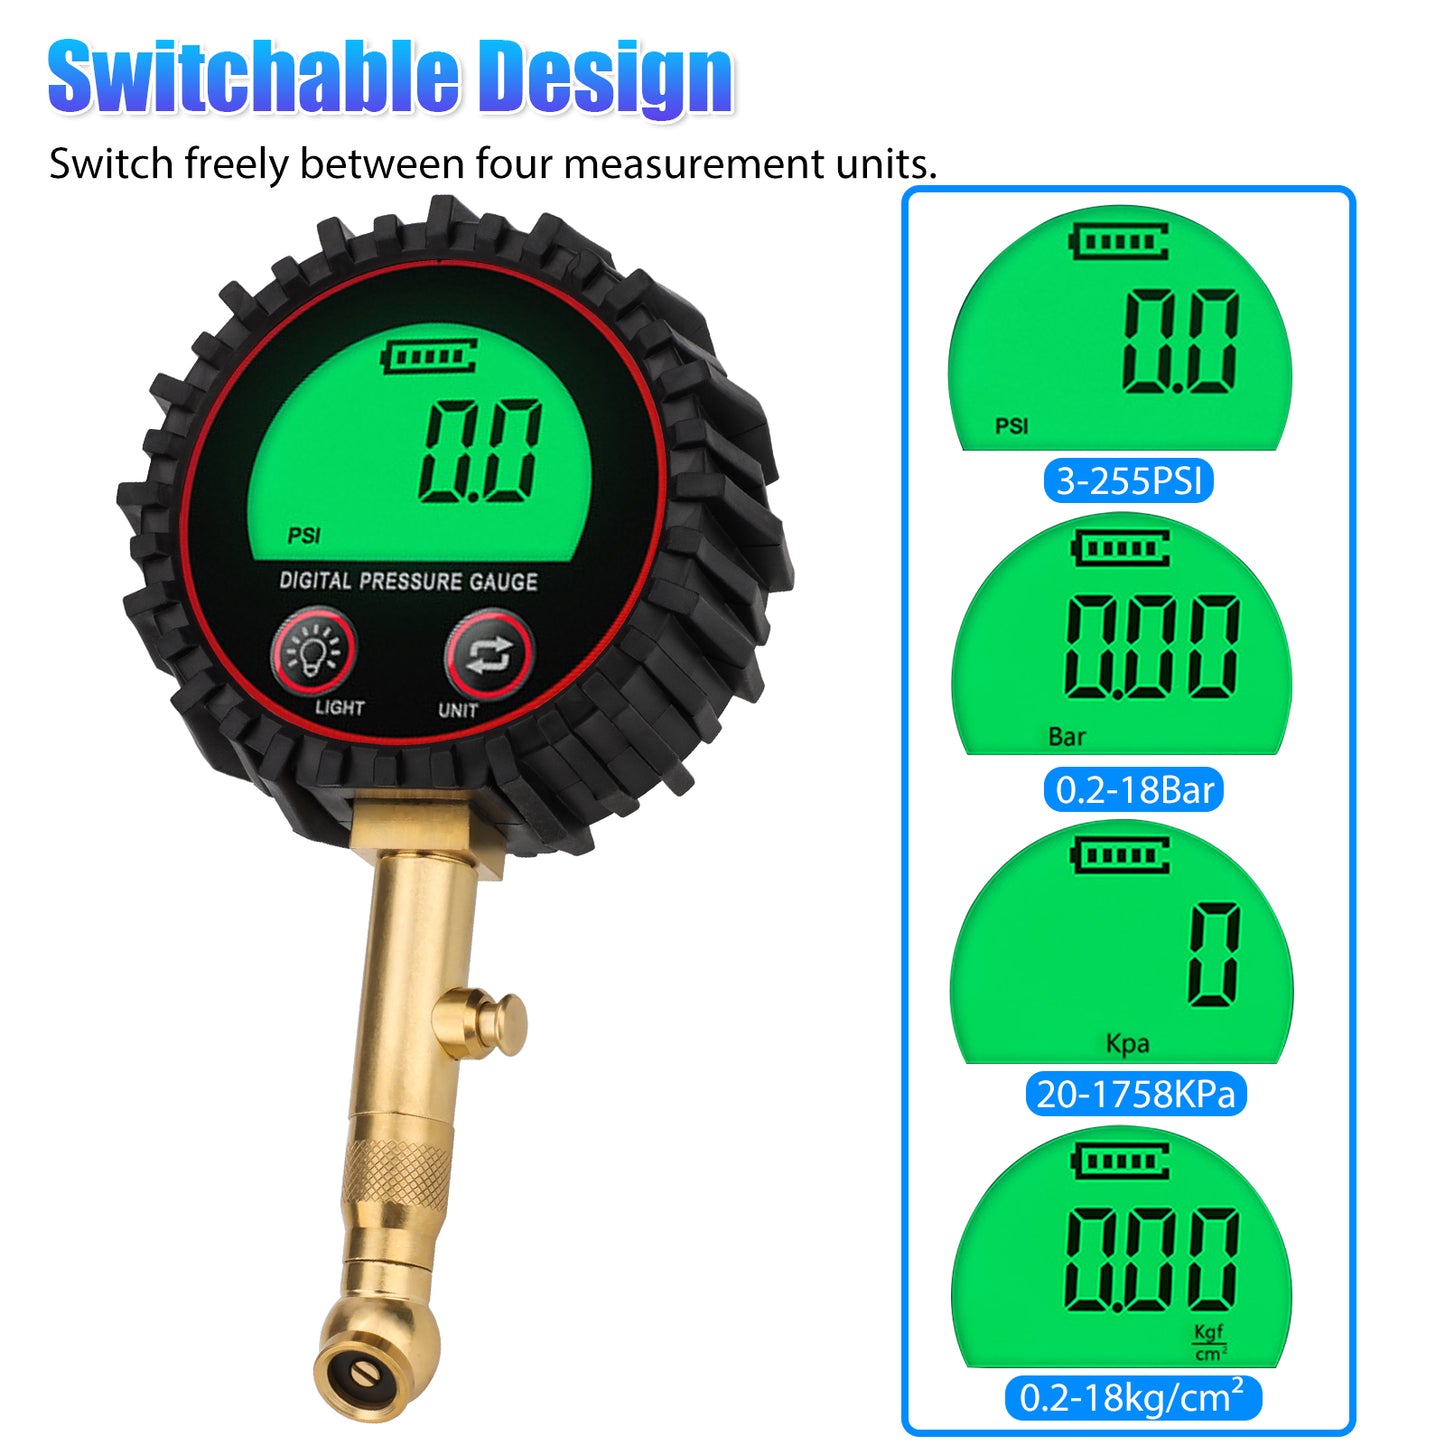 Tire Pressure Gauge - Rugged & Accurate, LCD Display, Switchable Units, Easy to Use, Ideal for Cars, Trucks, RVs